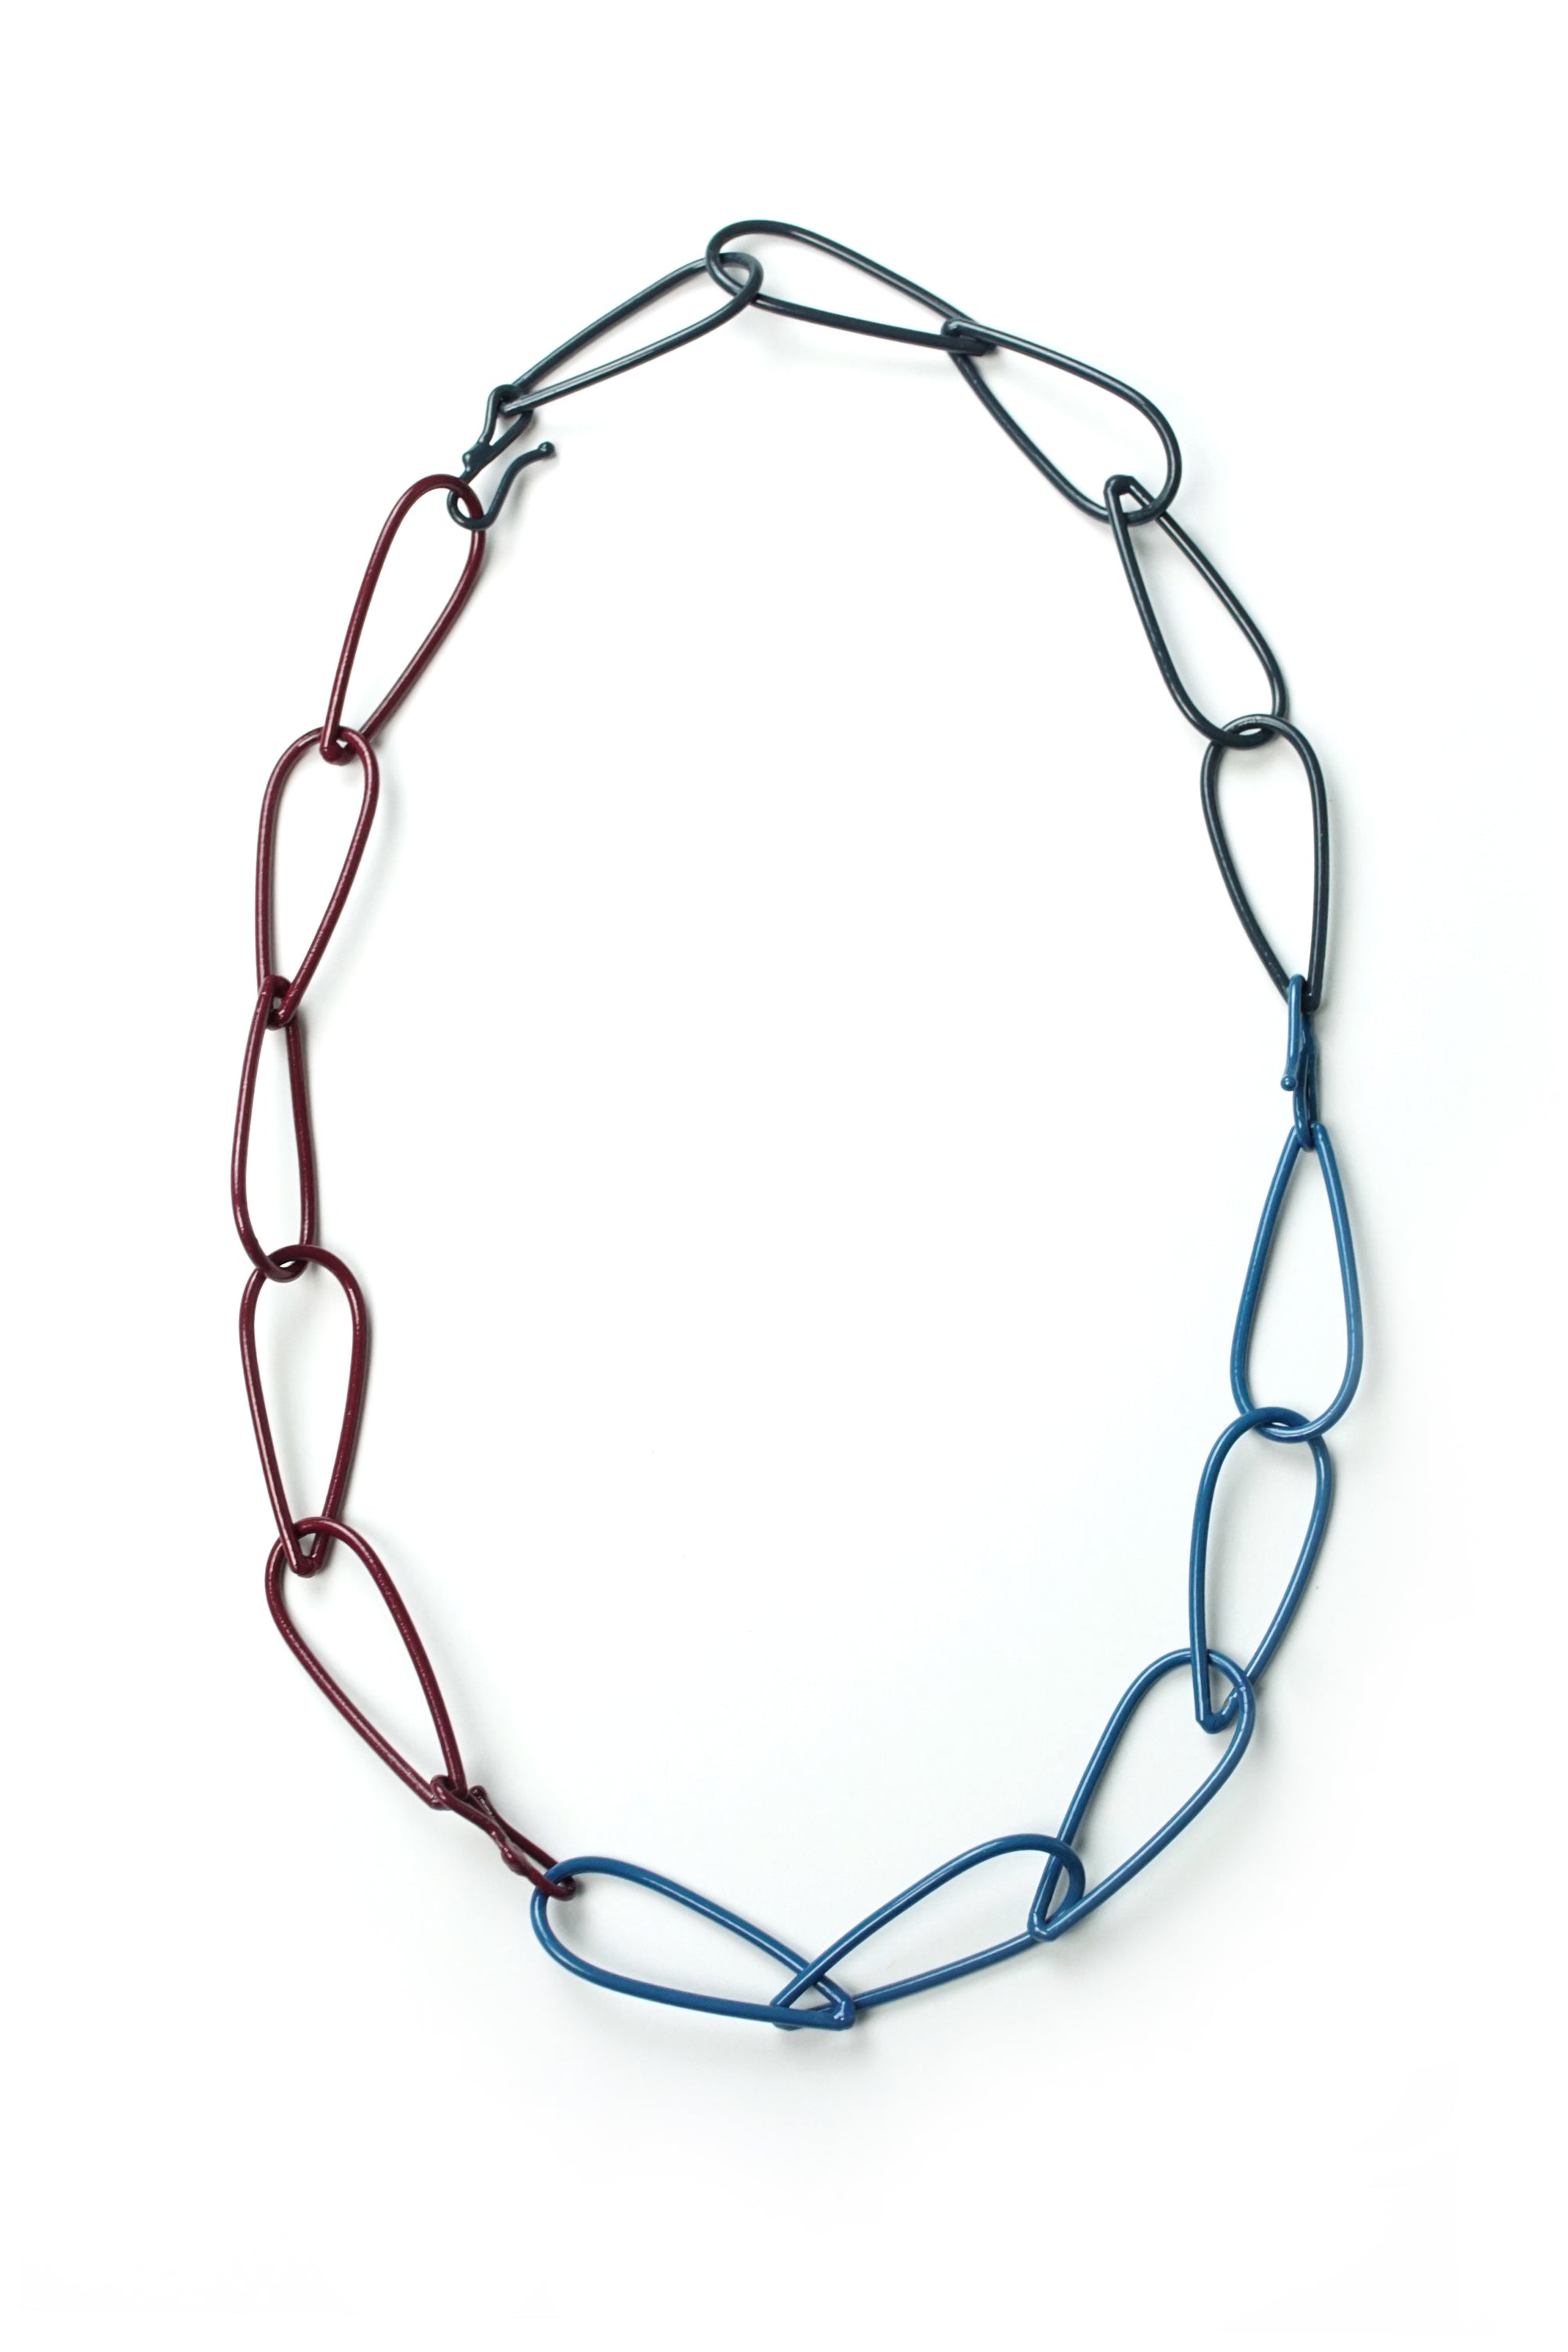 Modular Necklace in Lush Burgundy, Azure Blue, and Midnight Grey